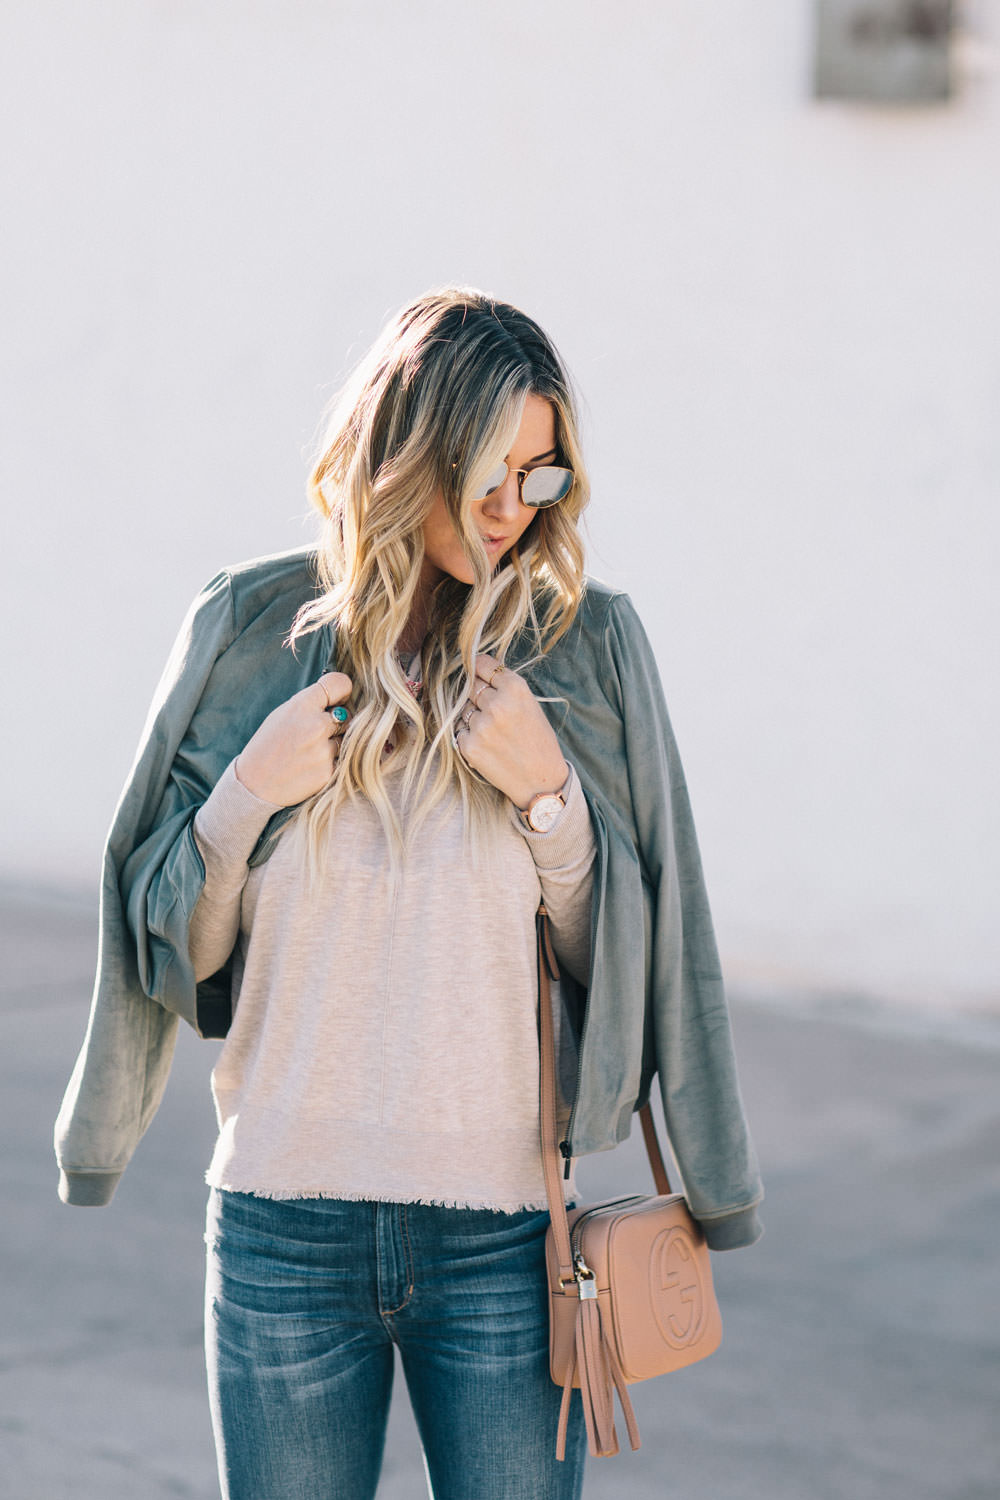 Dash of Darling styles a spring transition outfit with Stitch Fix